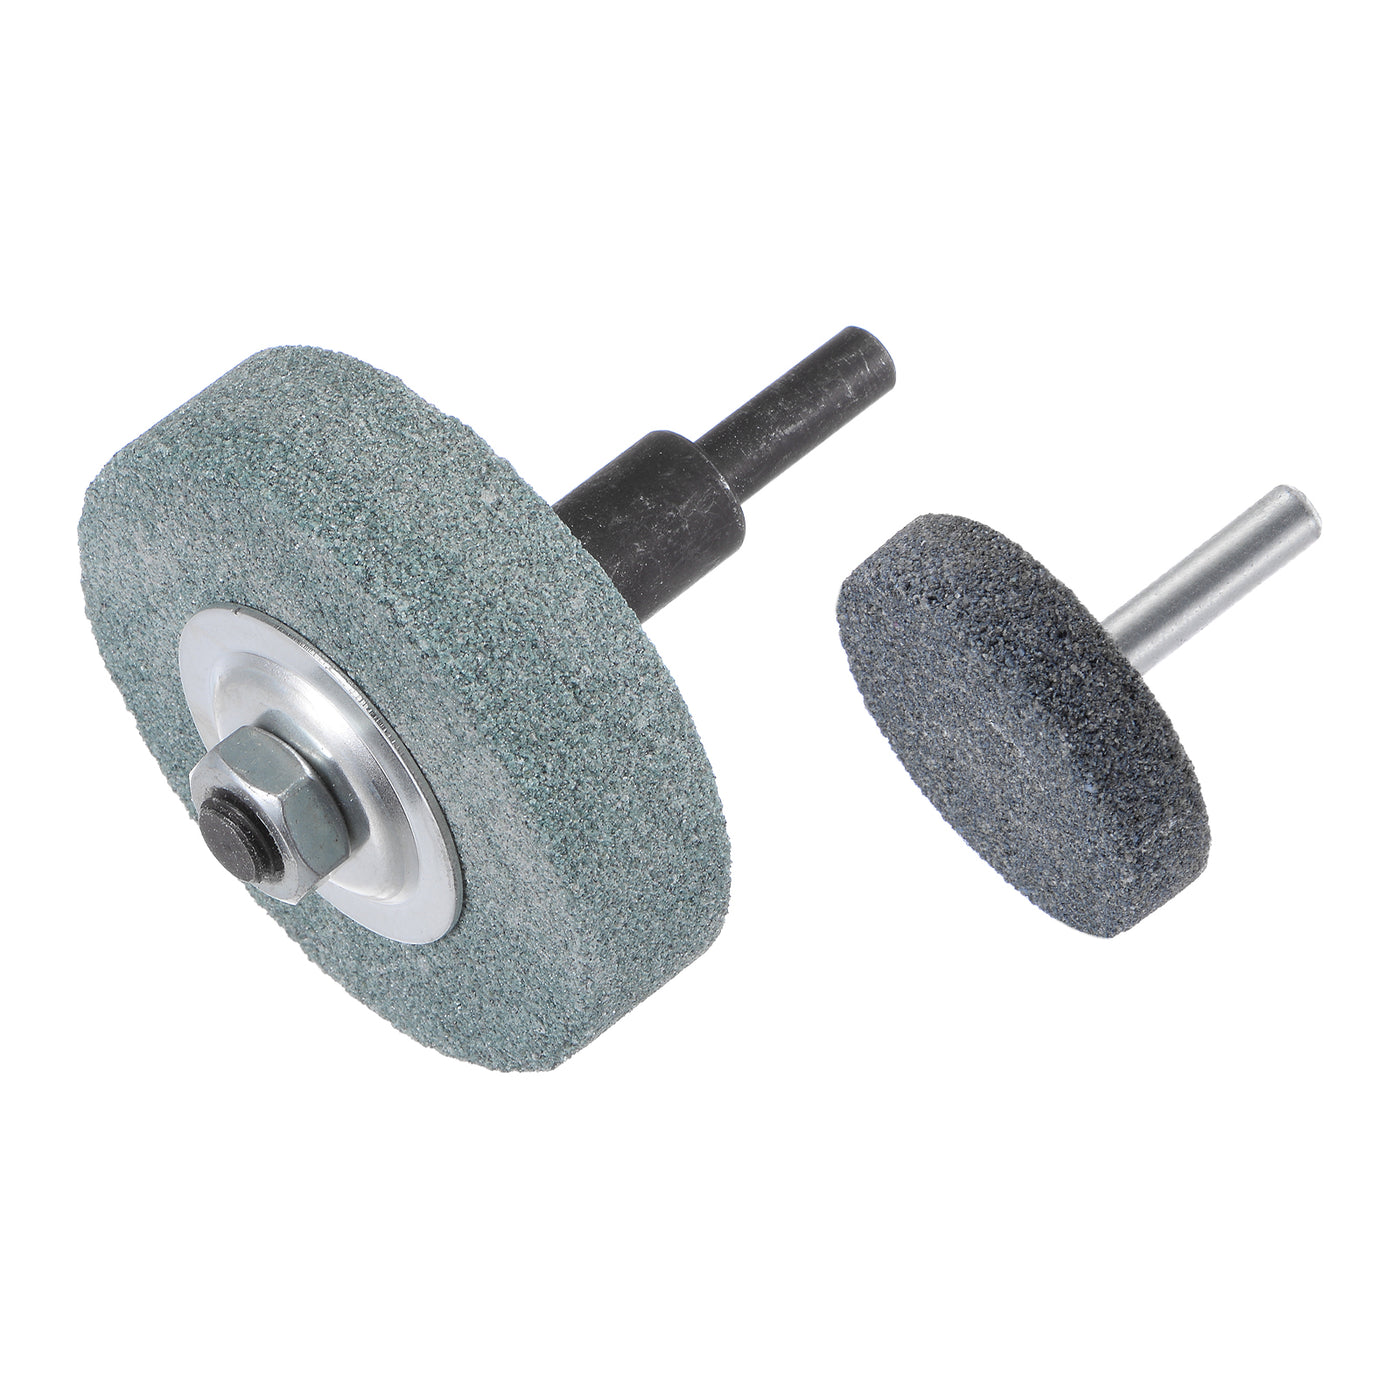 Uxcell Uxcell Mounted Grinding Stone 1.5-inch & 3-inch Dia Corundum Grinding Wheel